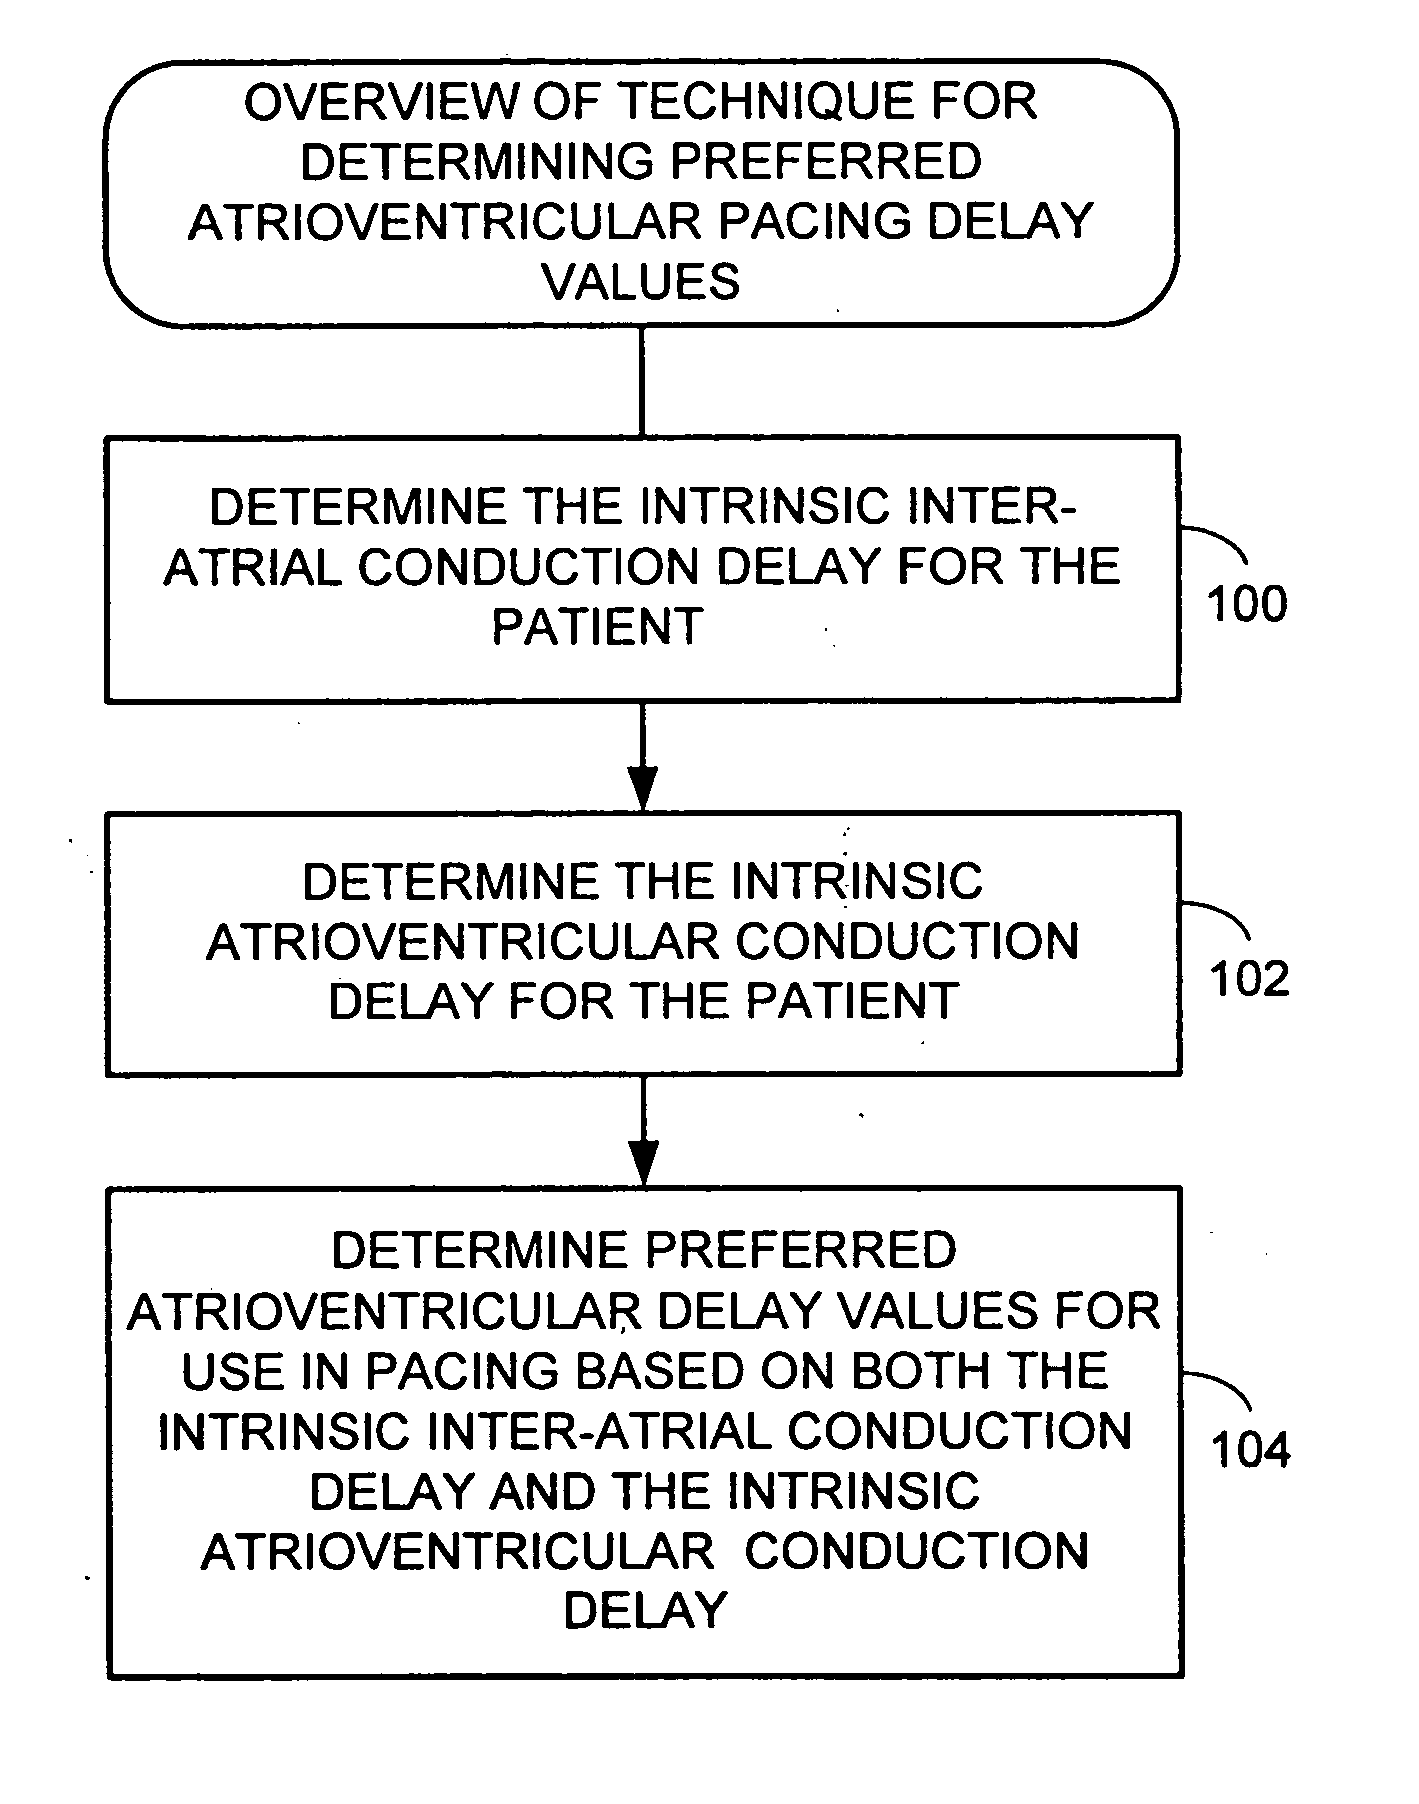 System and method for determining optimal atrioventricular delay based on intrinsic conduction delays